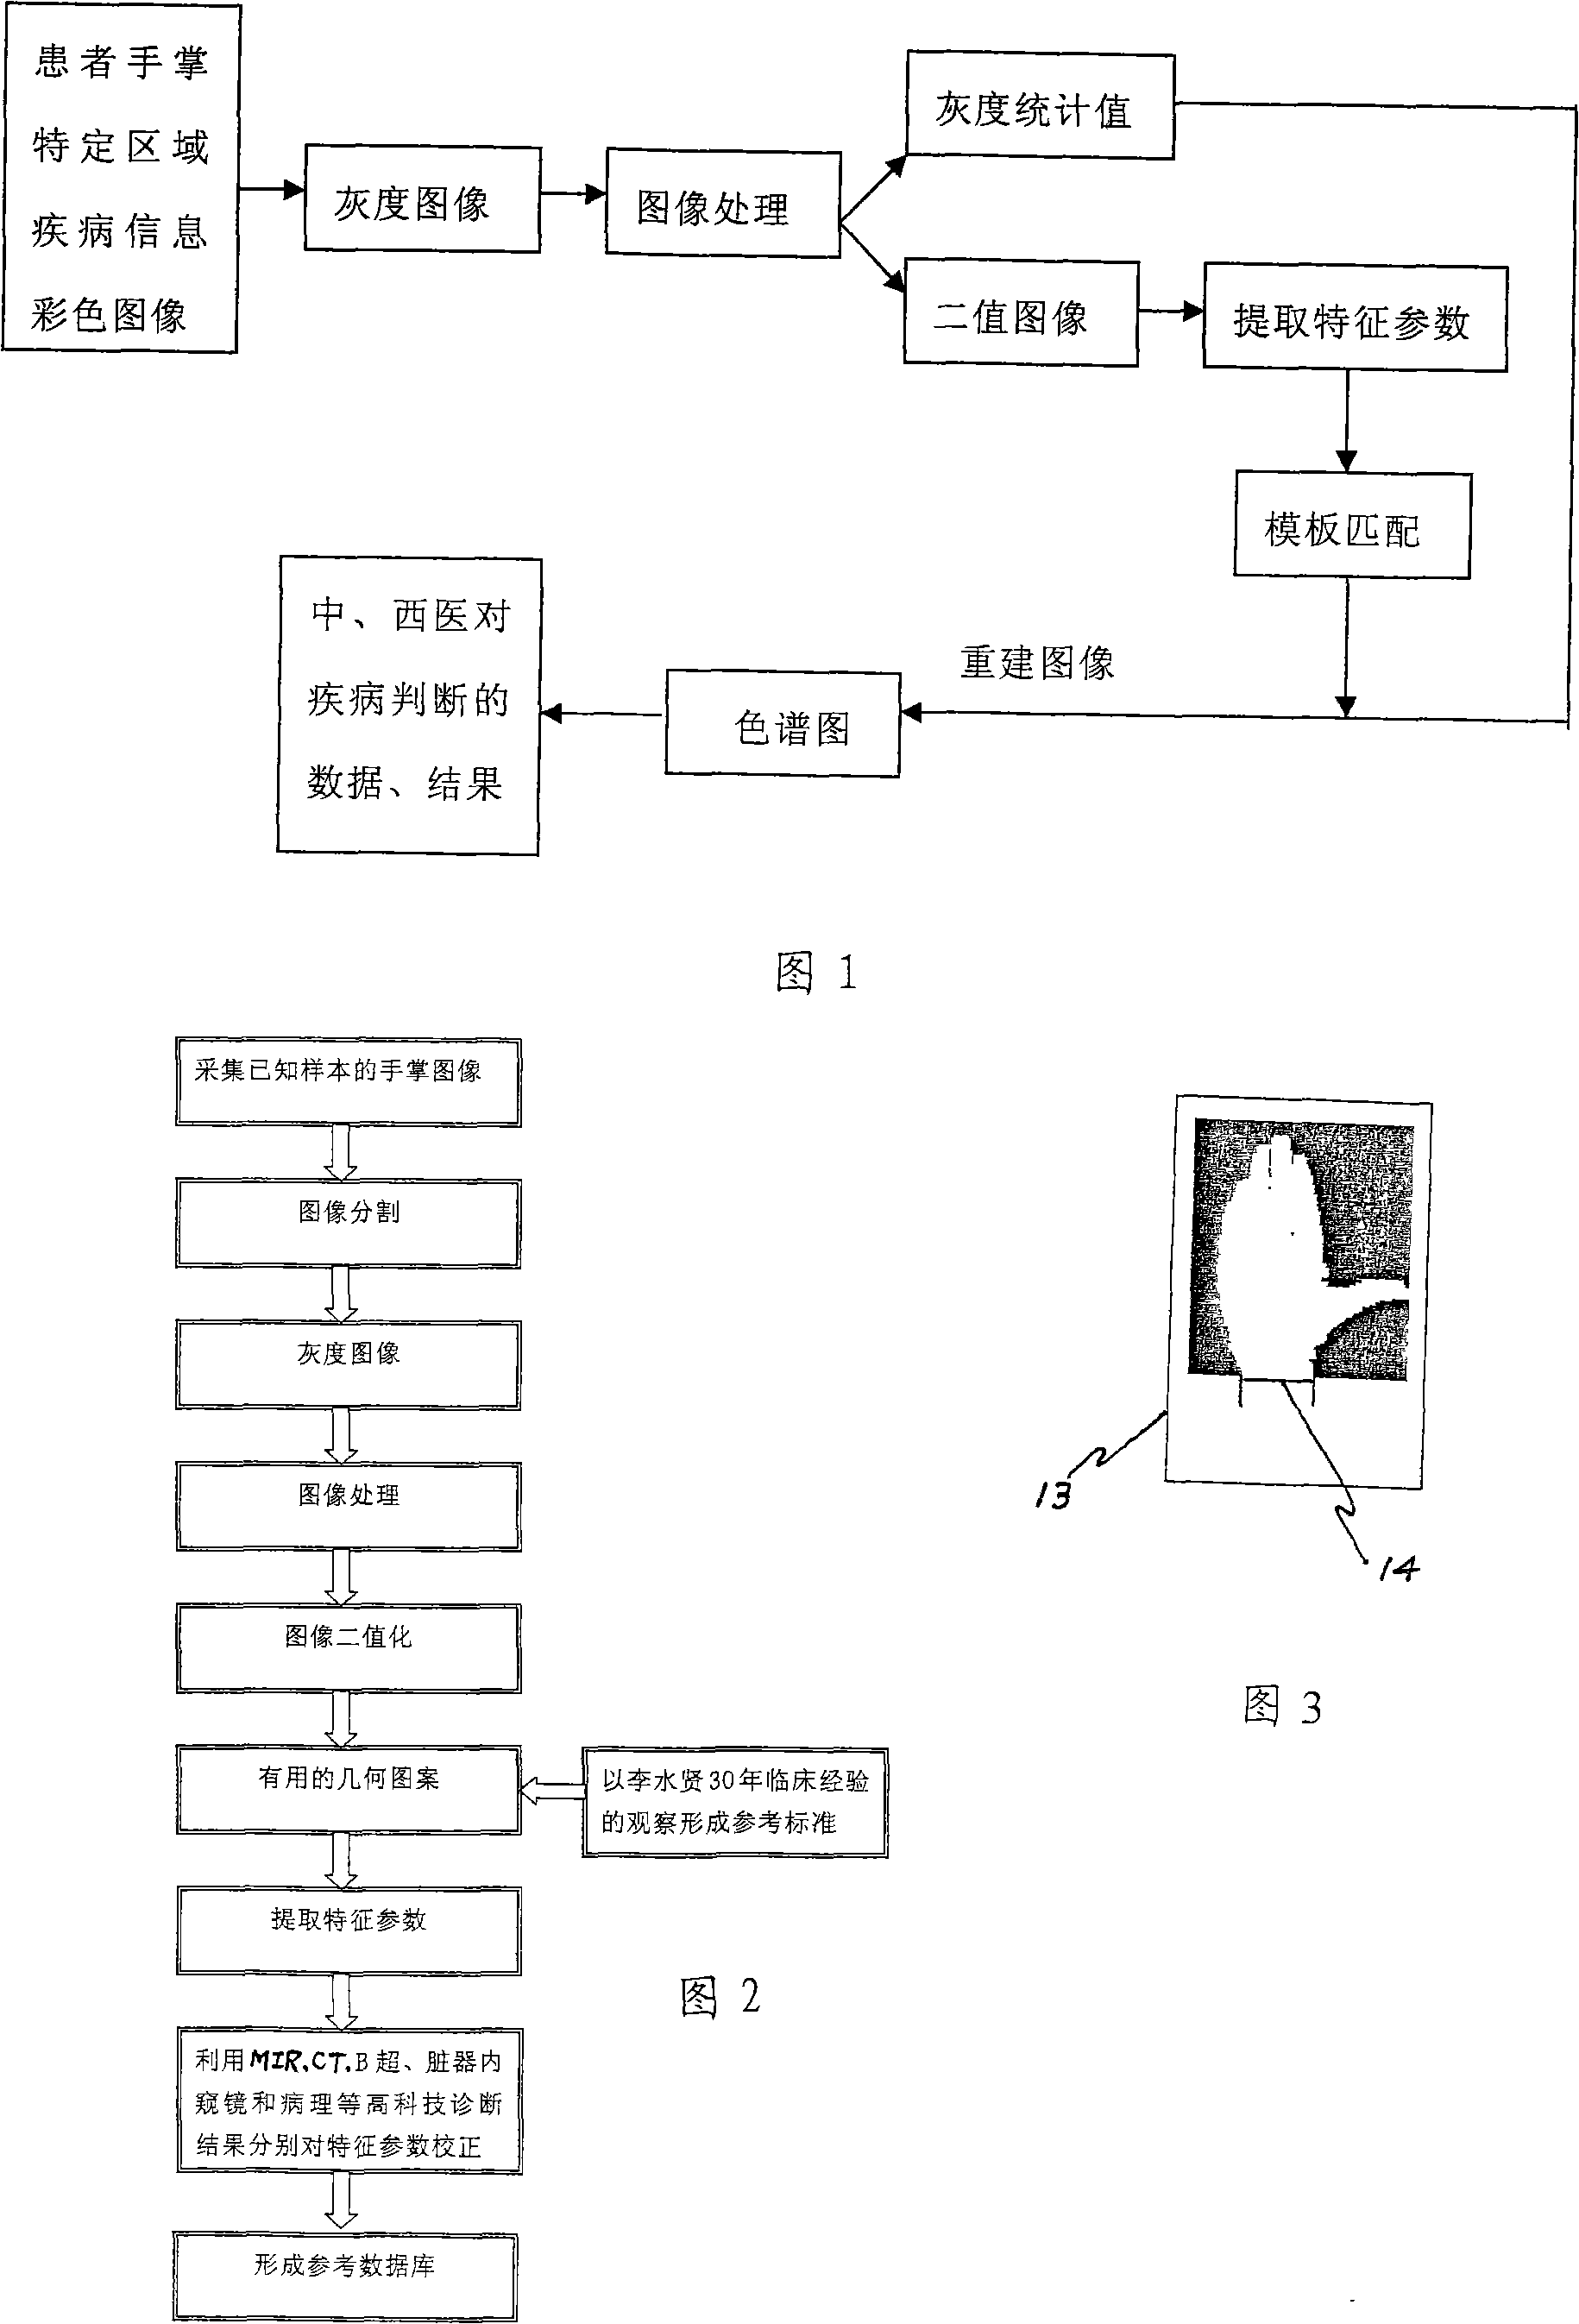 Image expression measuring method and apparatus for human disease information hand zone imaging